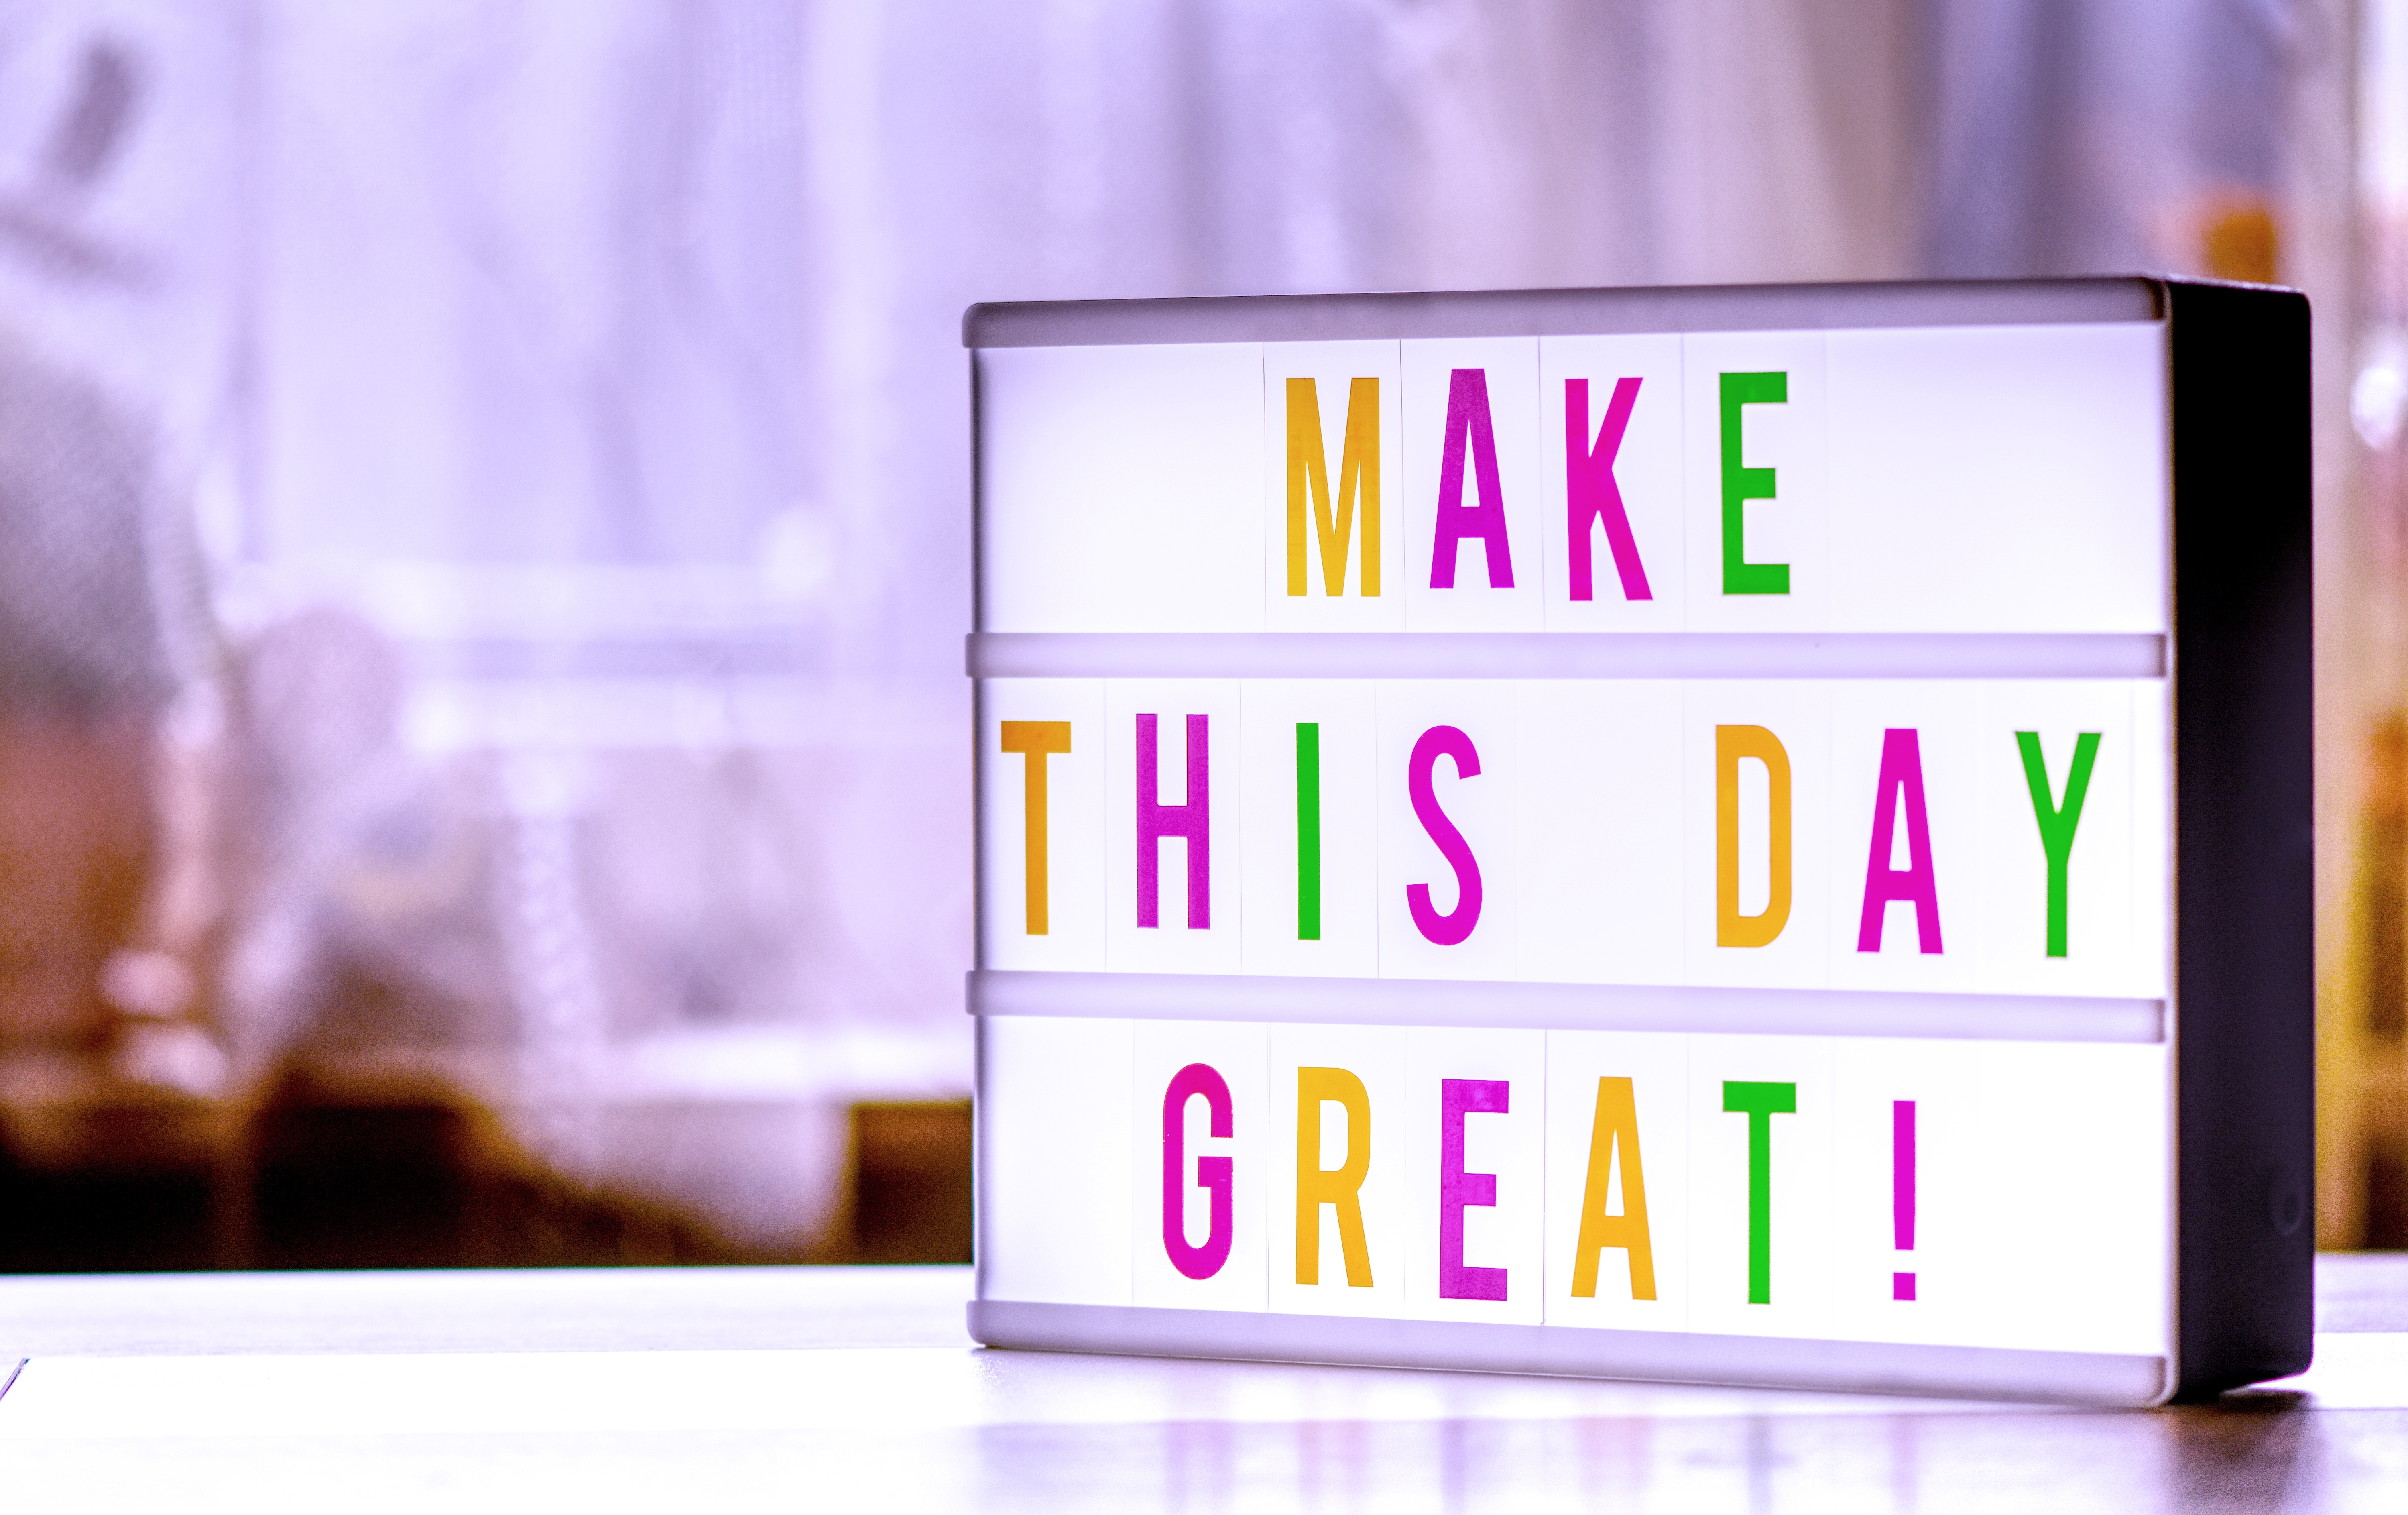 HD wallpaper, Motivational, Cinematic Light Box, 5K, Encouragement, Make This Day Great